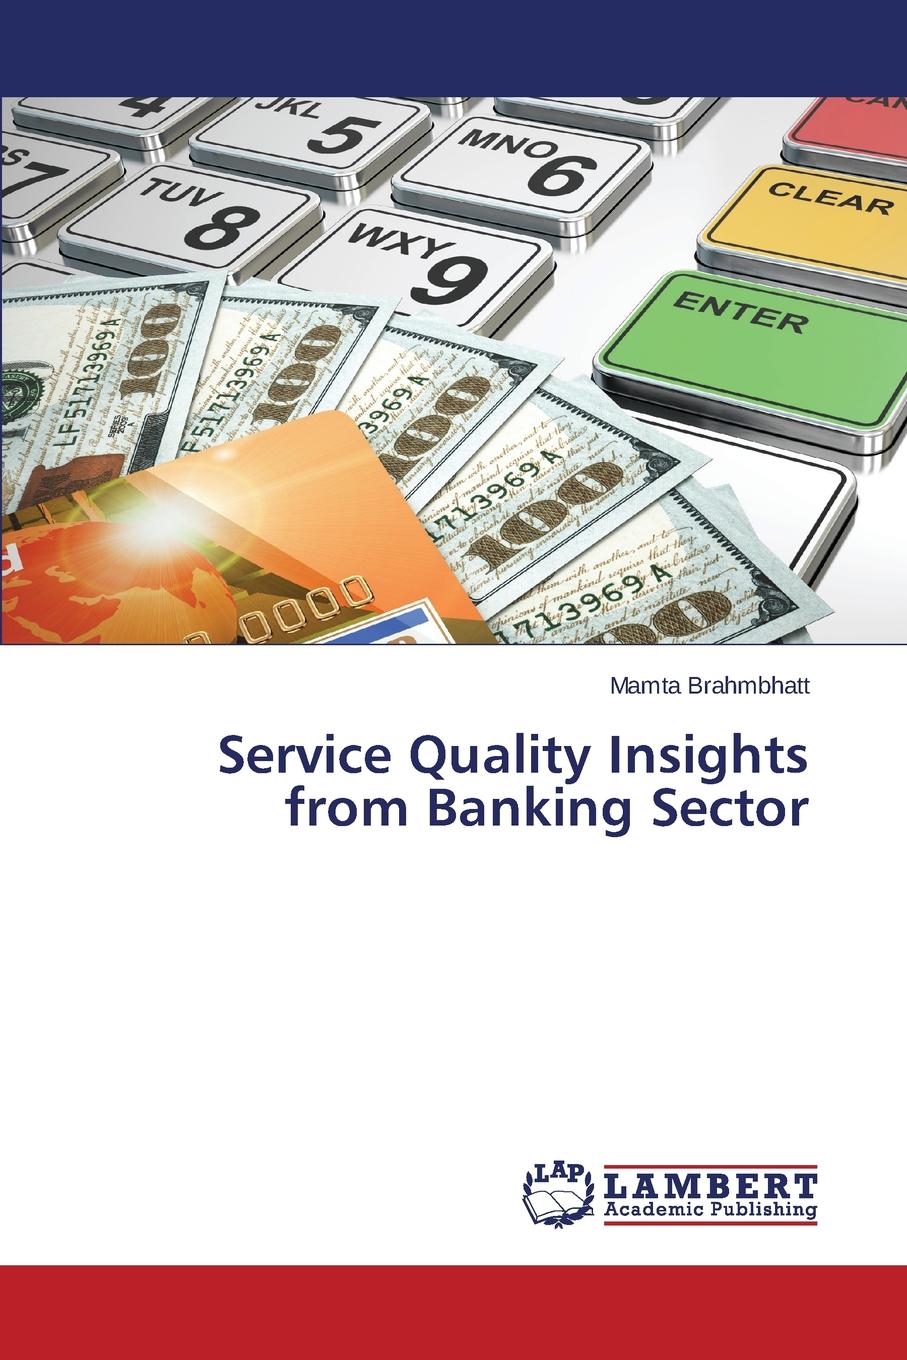 Cbr ru banking sector. Banking sector. Banking services. Quality service of Bank. Service book.